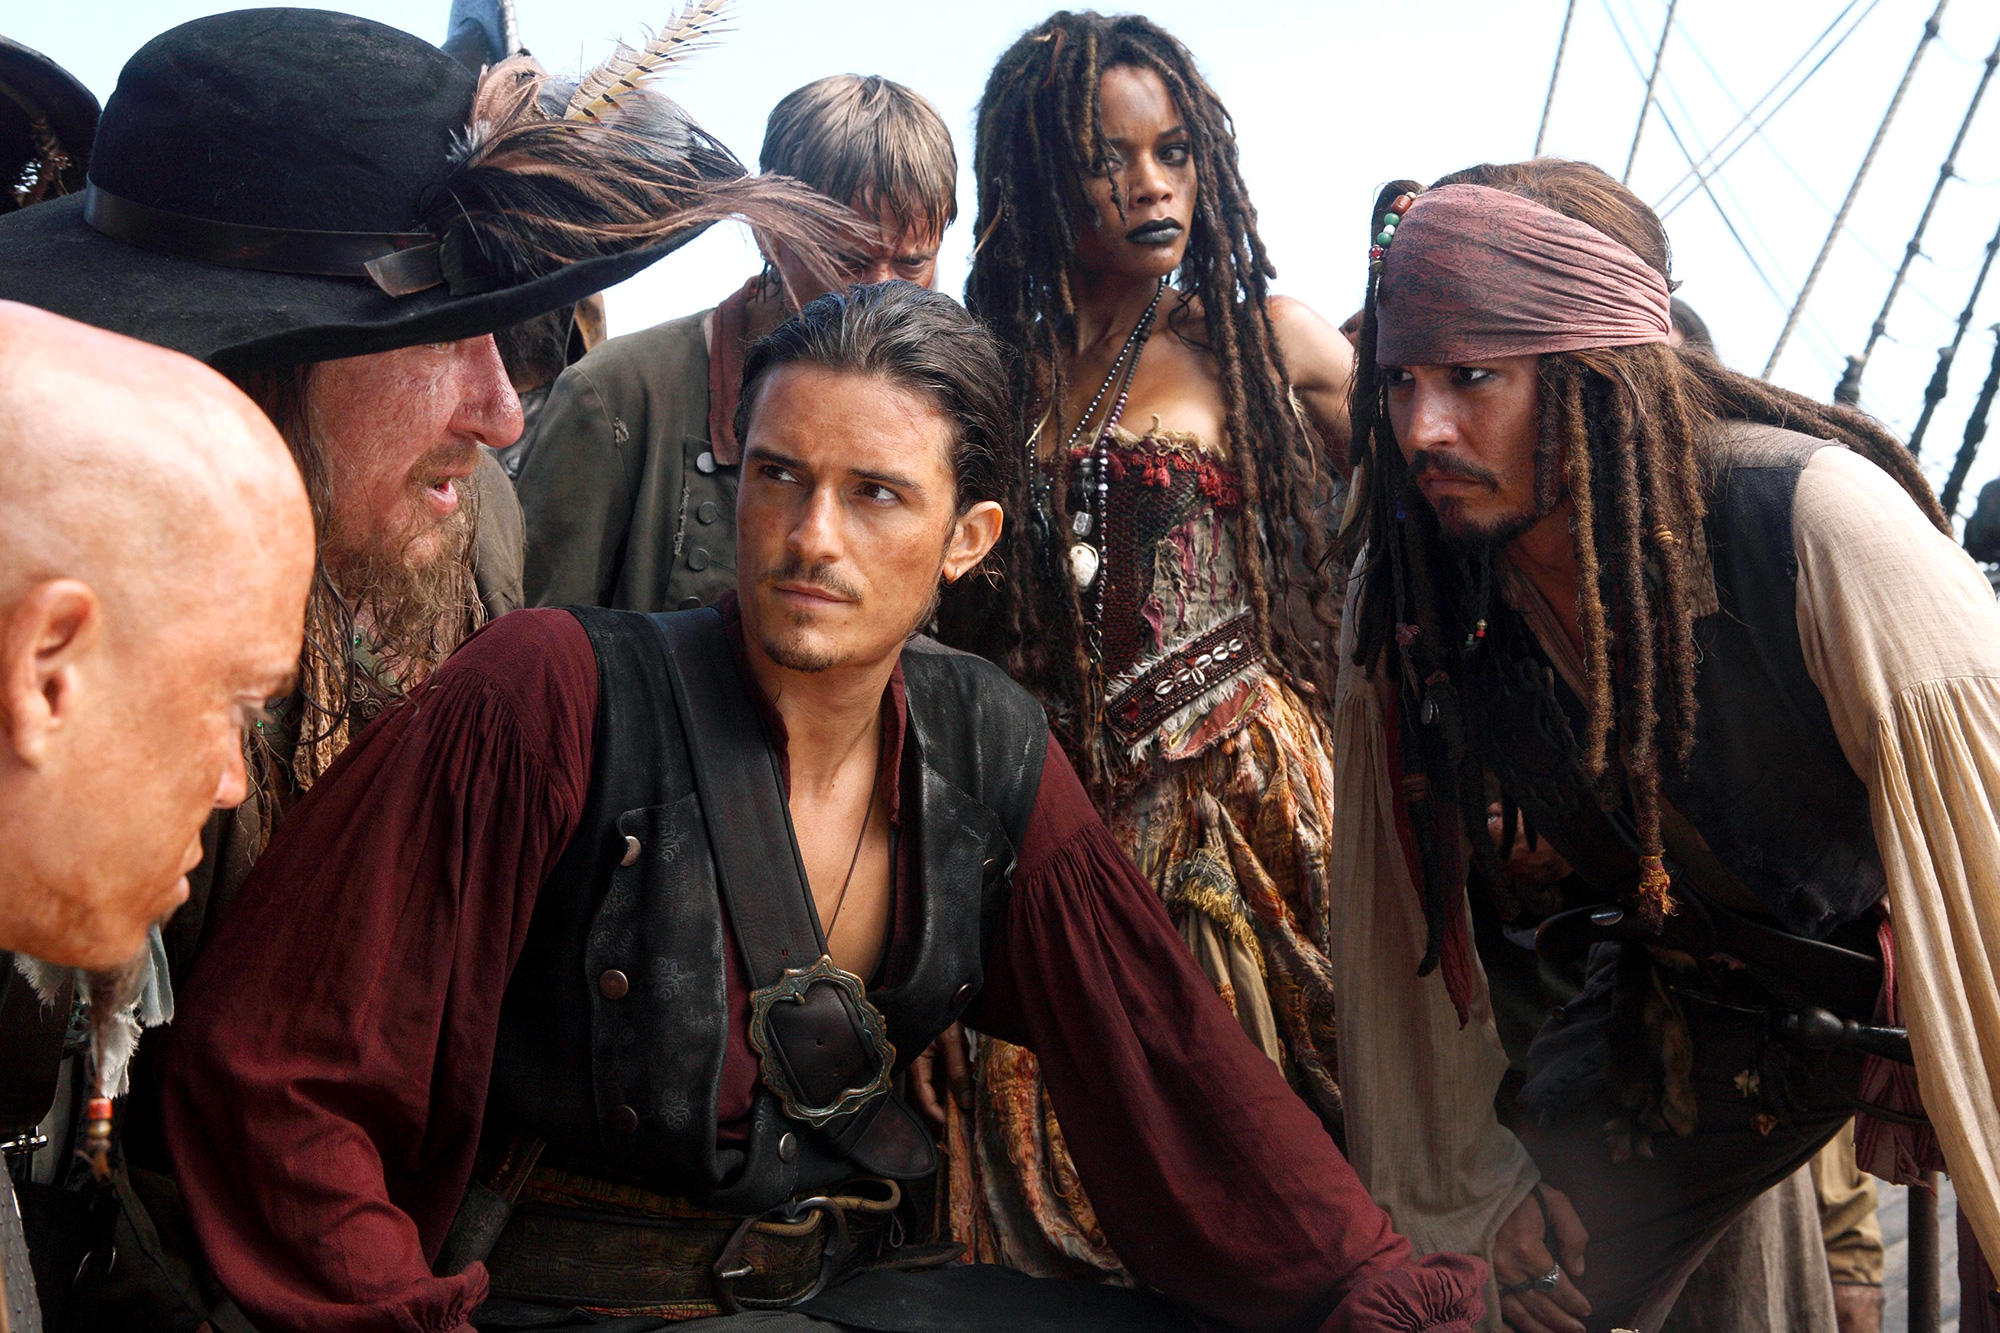  Pirates of the Caribbean: At World's End : Johnny Depp, Keira  Knightley, Orlando Bloom: Movies & TV